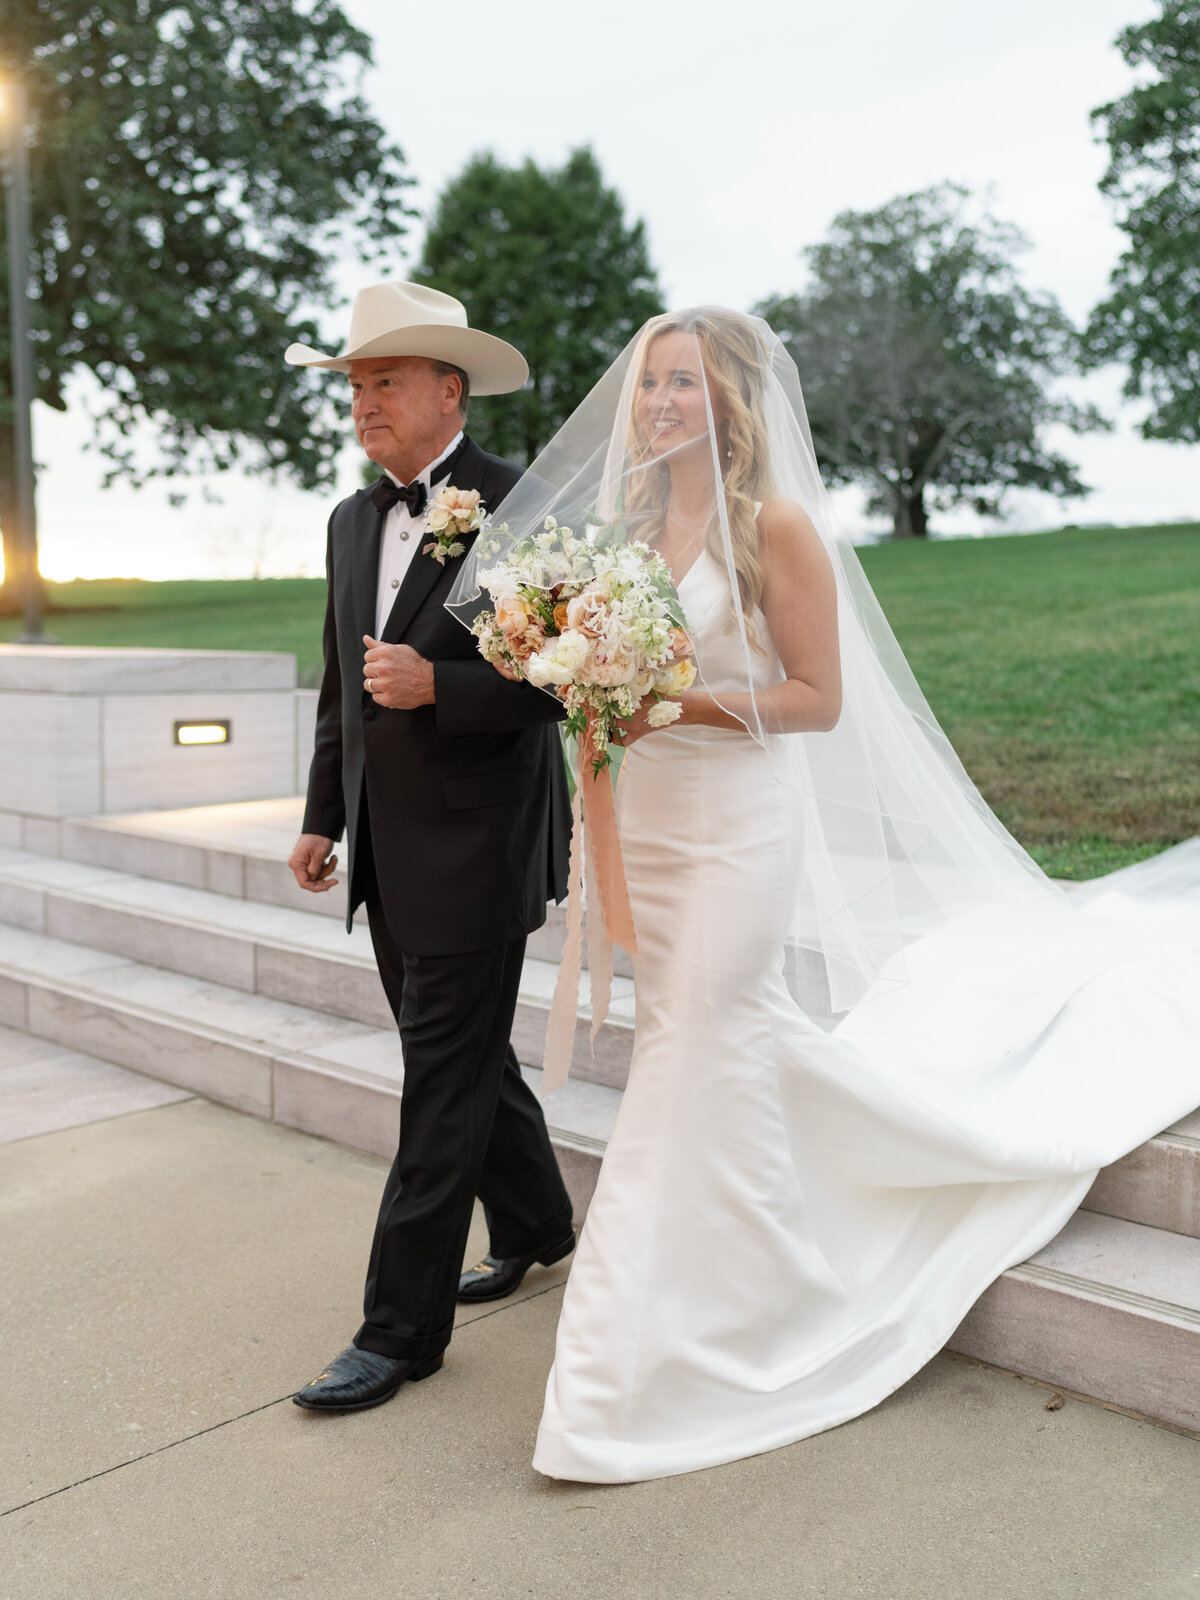 Whitney Bowman Events Knoxville Tennessee Wedding Planner Planning Destination Southern Weddings Florida 30A Alabama Luxury Event Destination Weddings MaggieSpencerWedding_Knoxville_2022_@benfinch_FinchPhoto-259